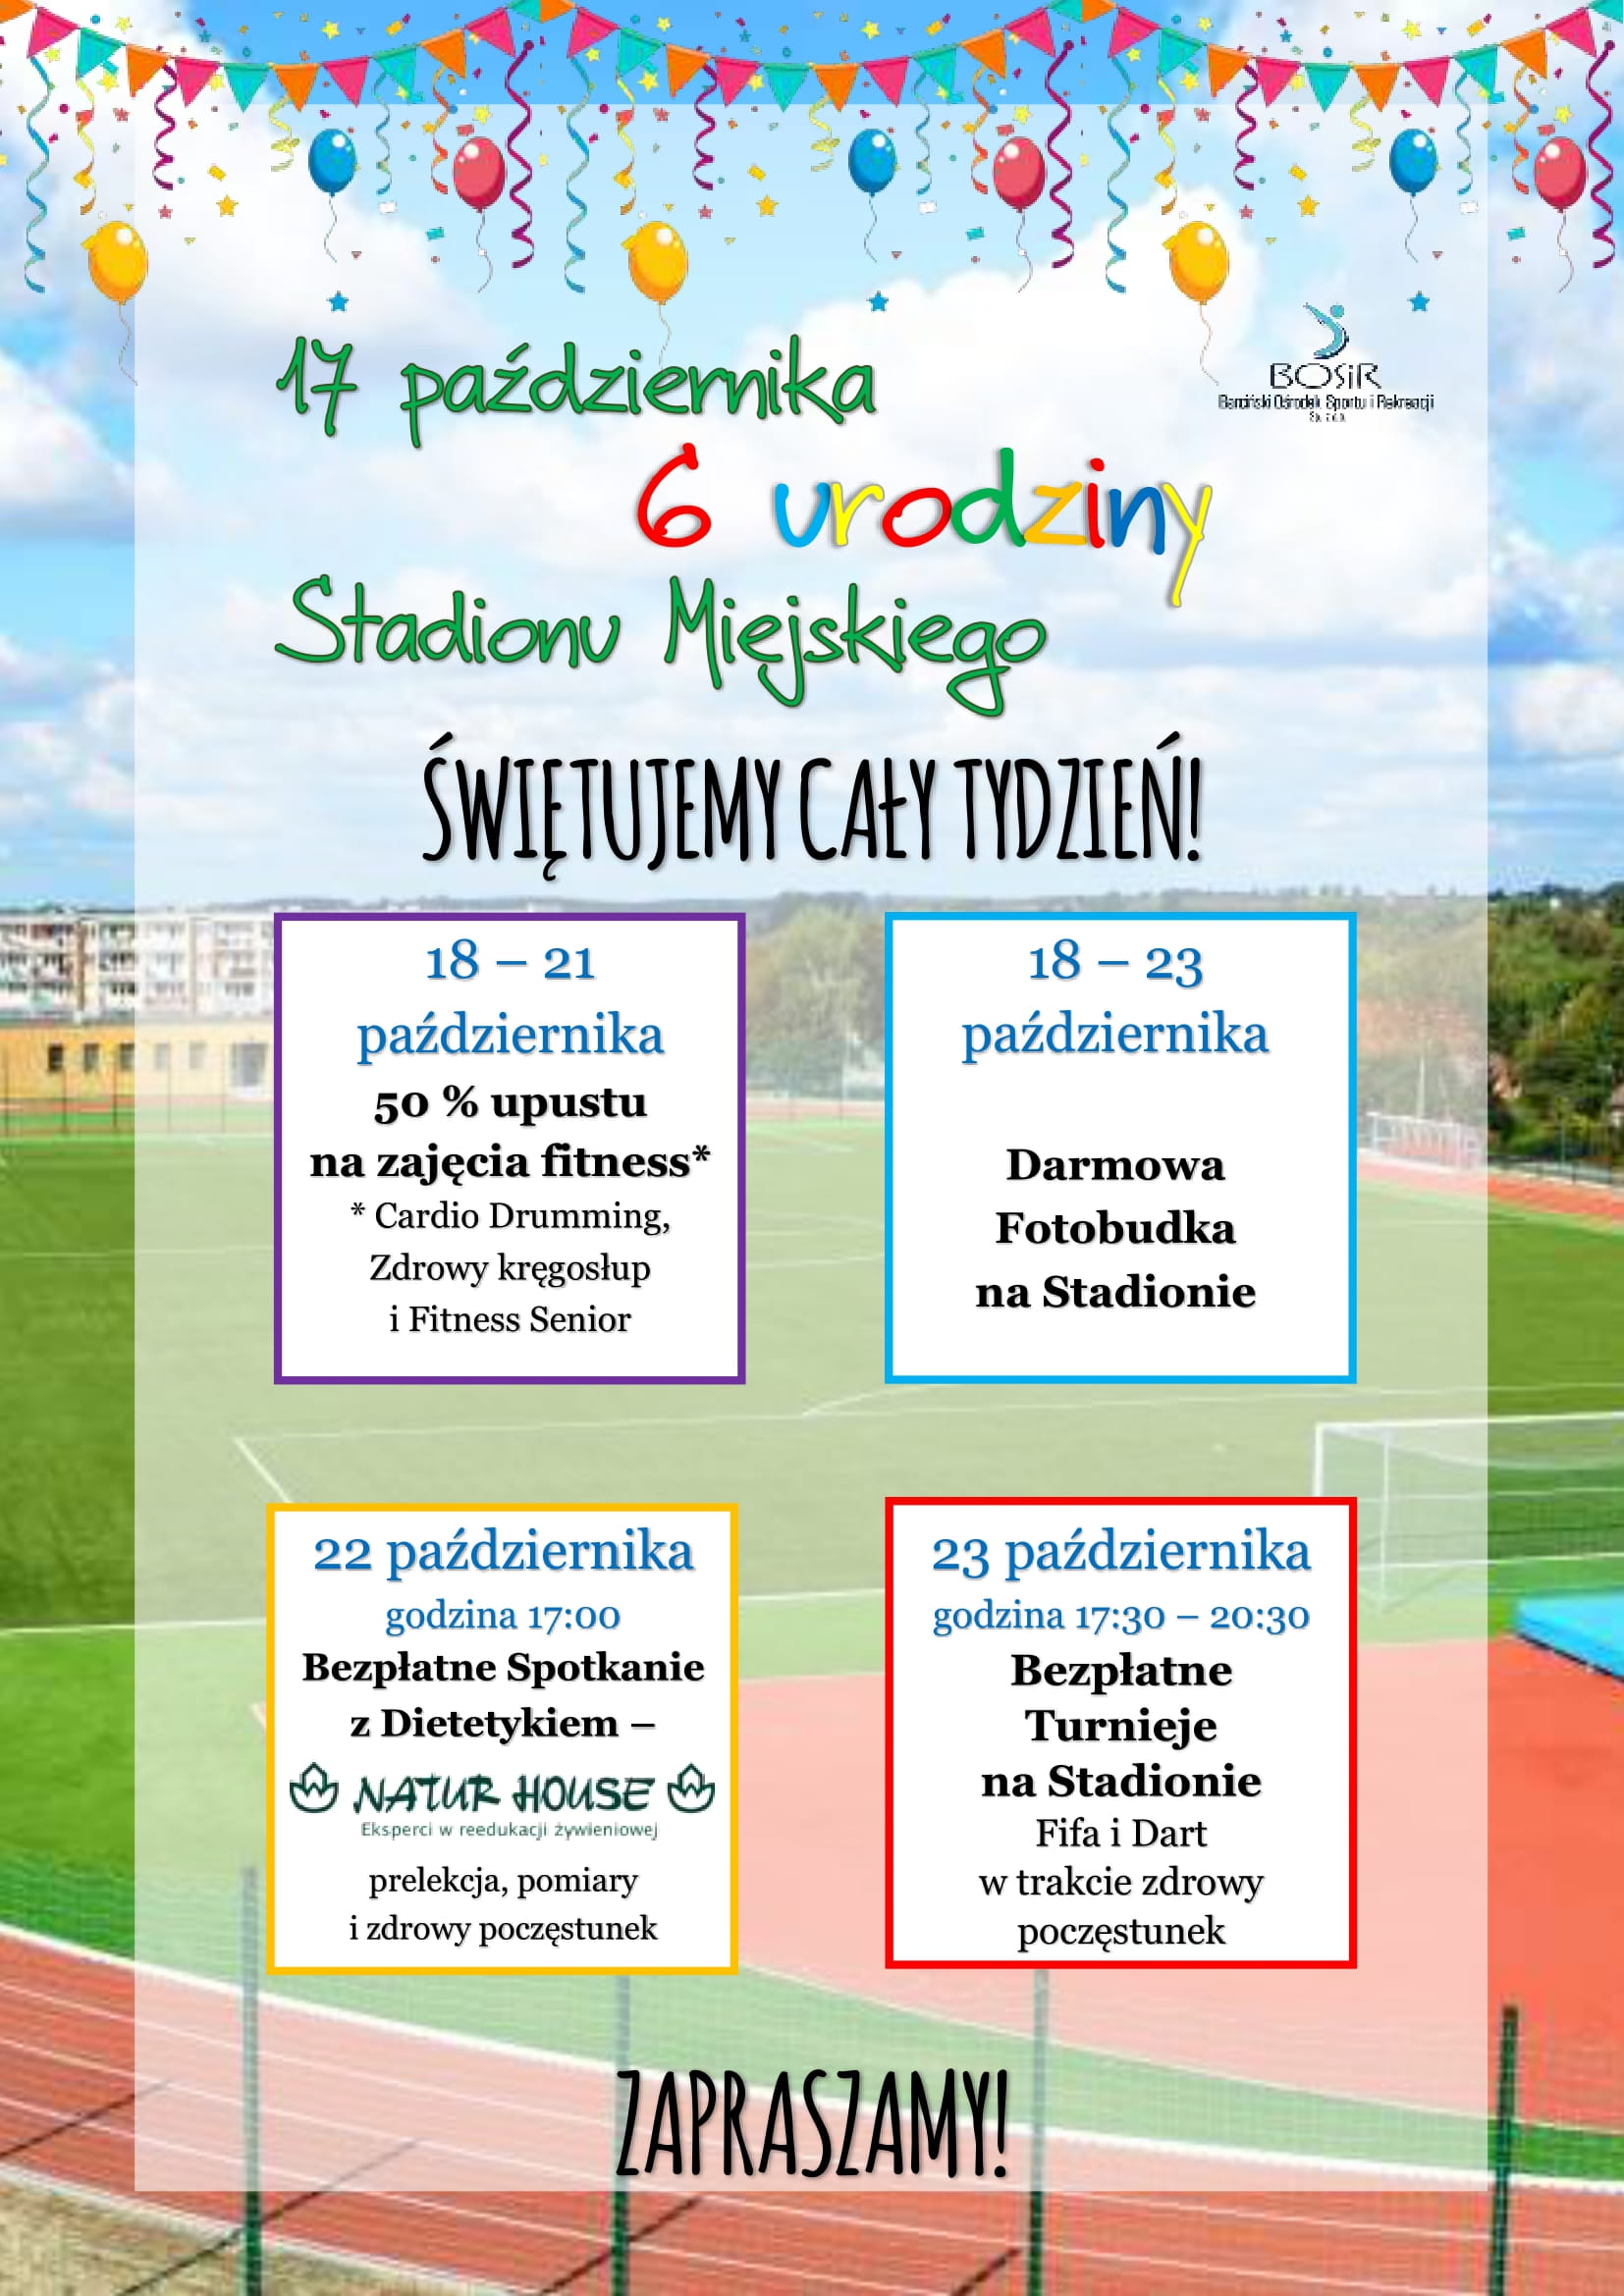 You are currently viewing 6 urodziny Stadionu!